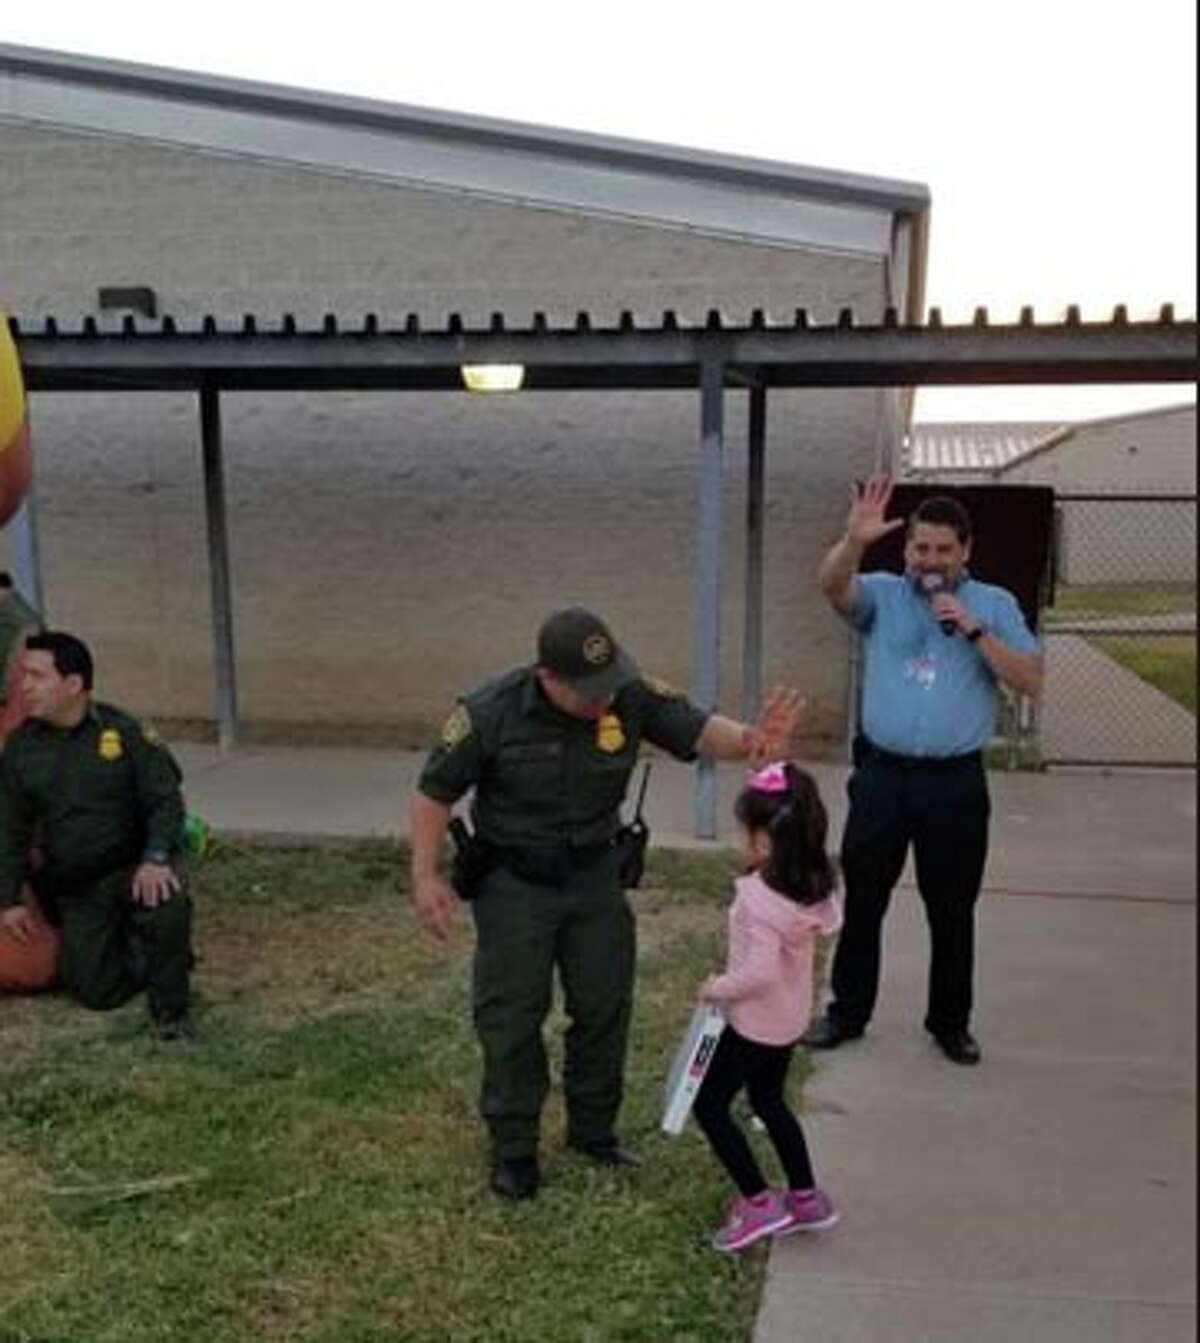 Border Patrol agents from the Laredo Sector Border Community Liaison Program welcomed students back to school at the entrances of Milton Elementary, Malakoff elementary and Farias Elementary.